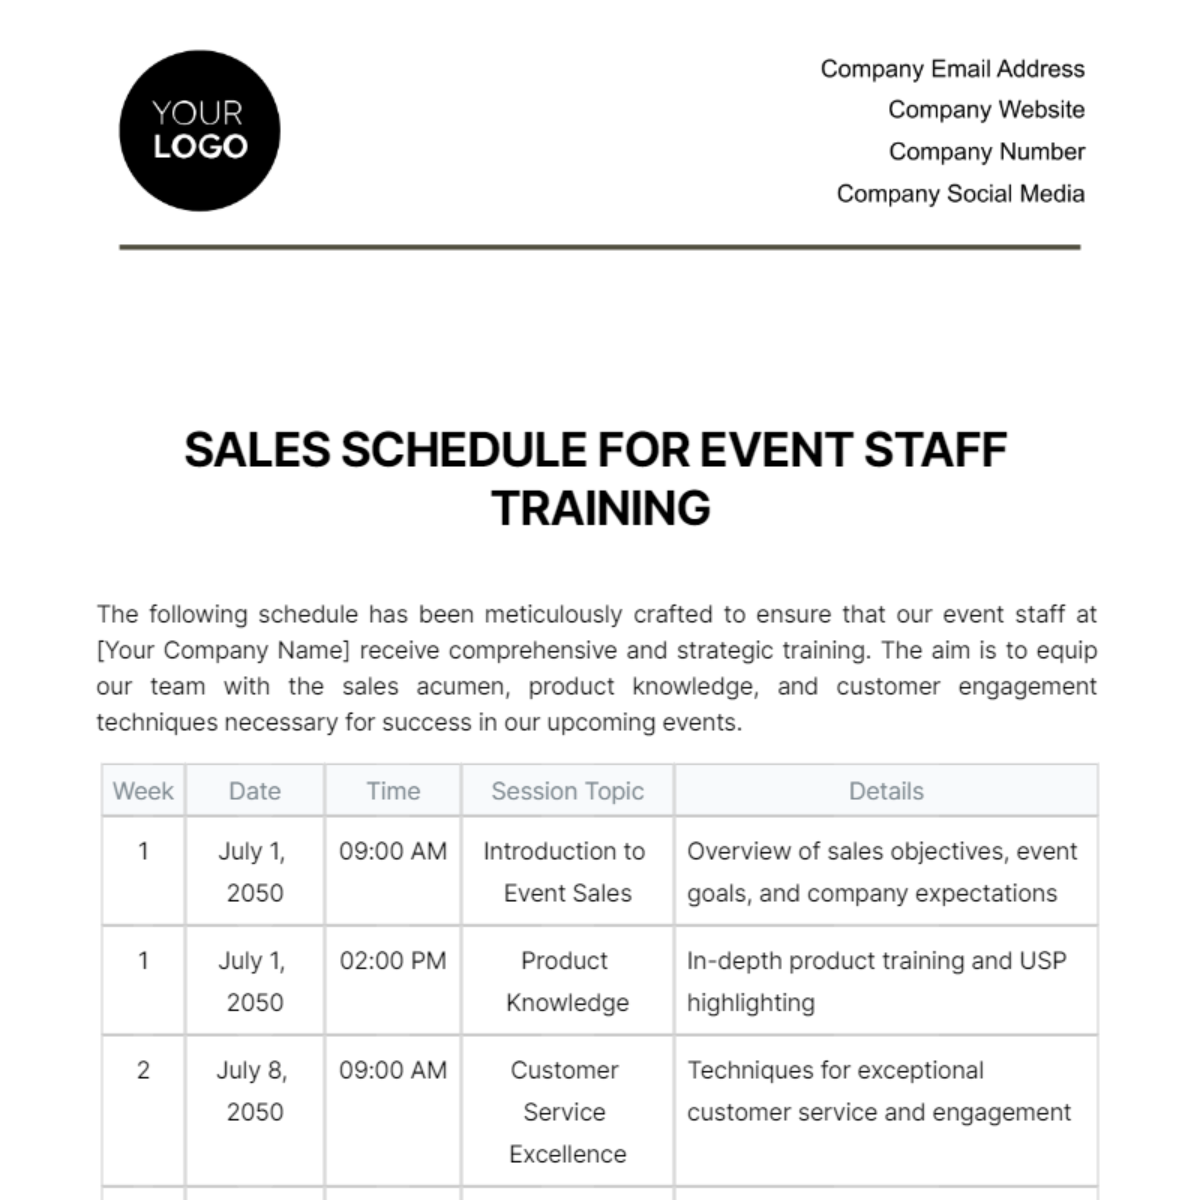 Sales Schedule for Event Staff Training Template